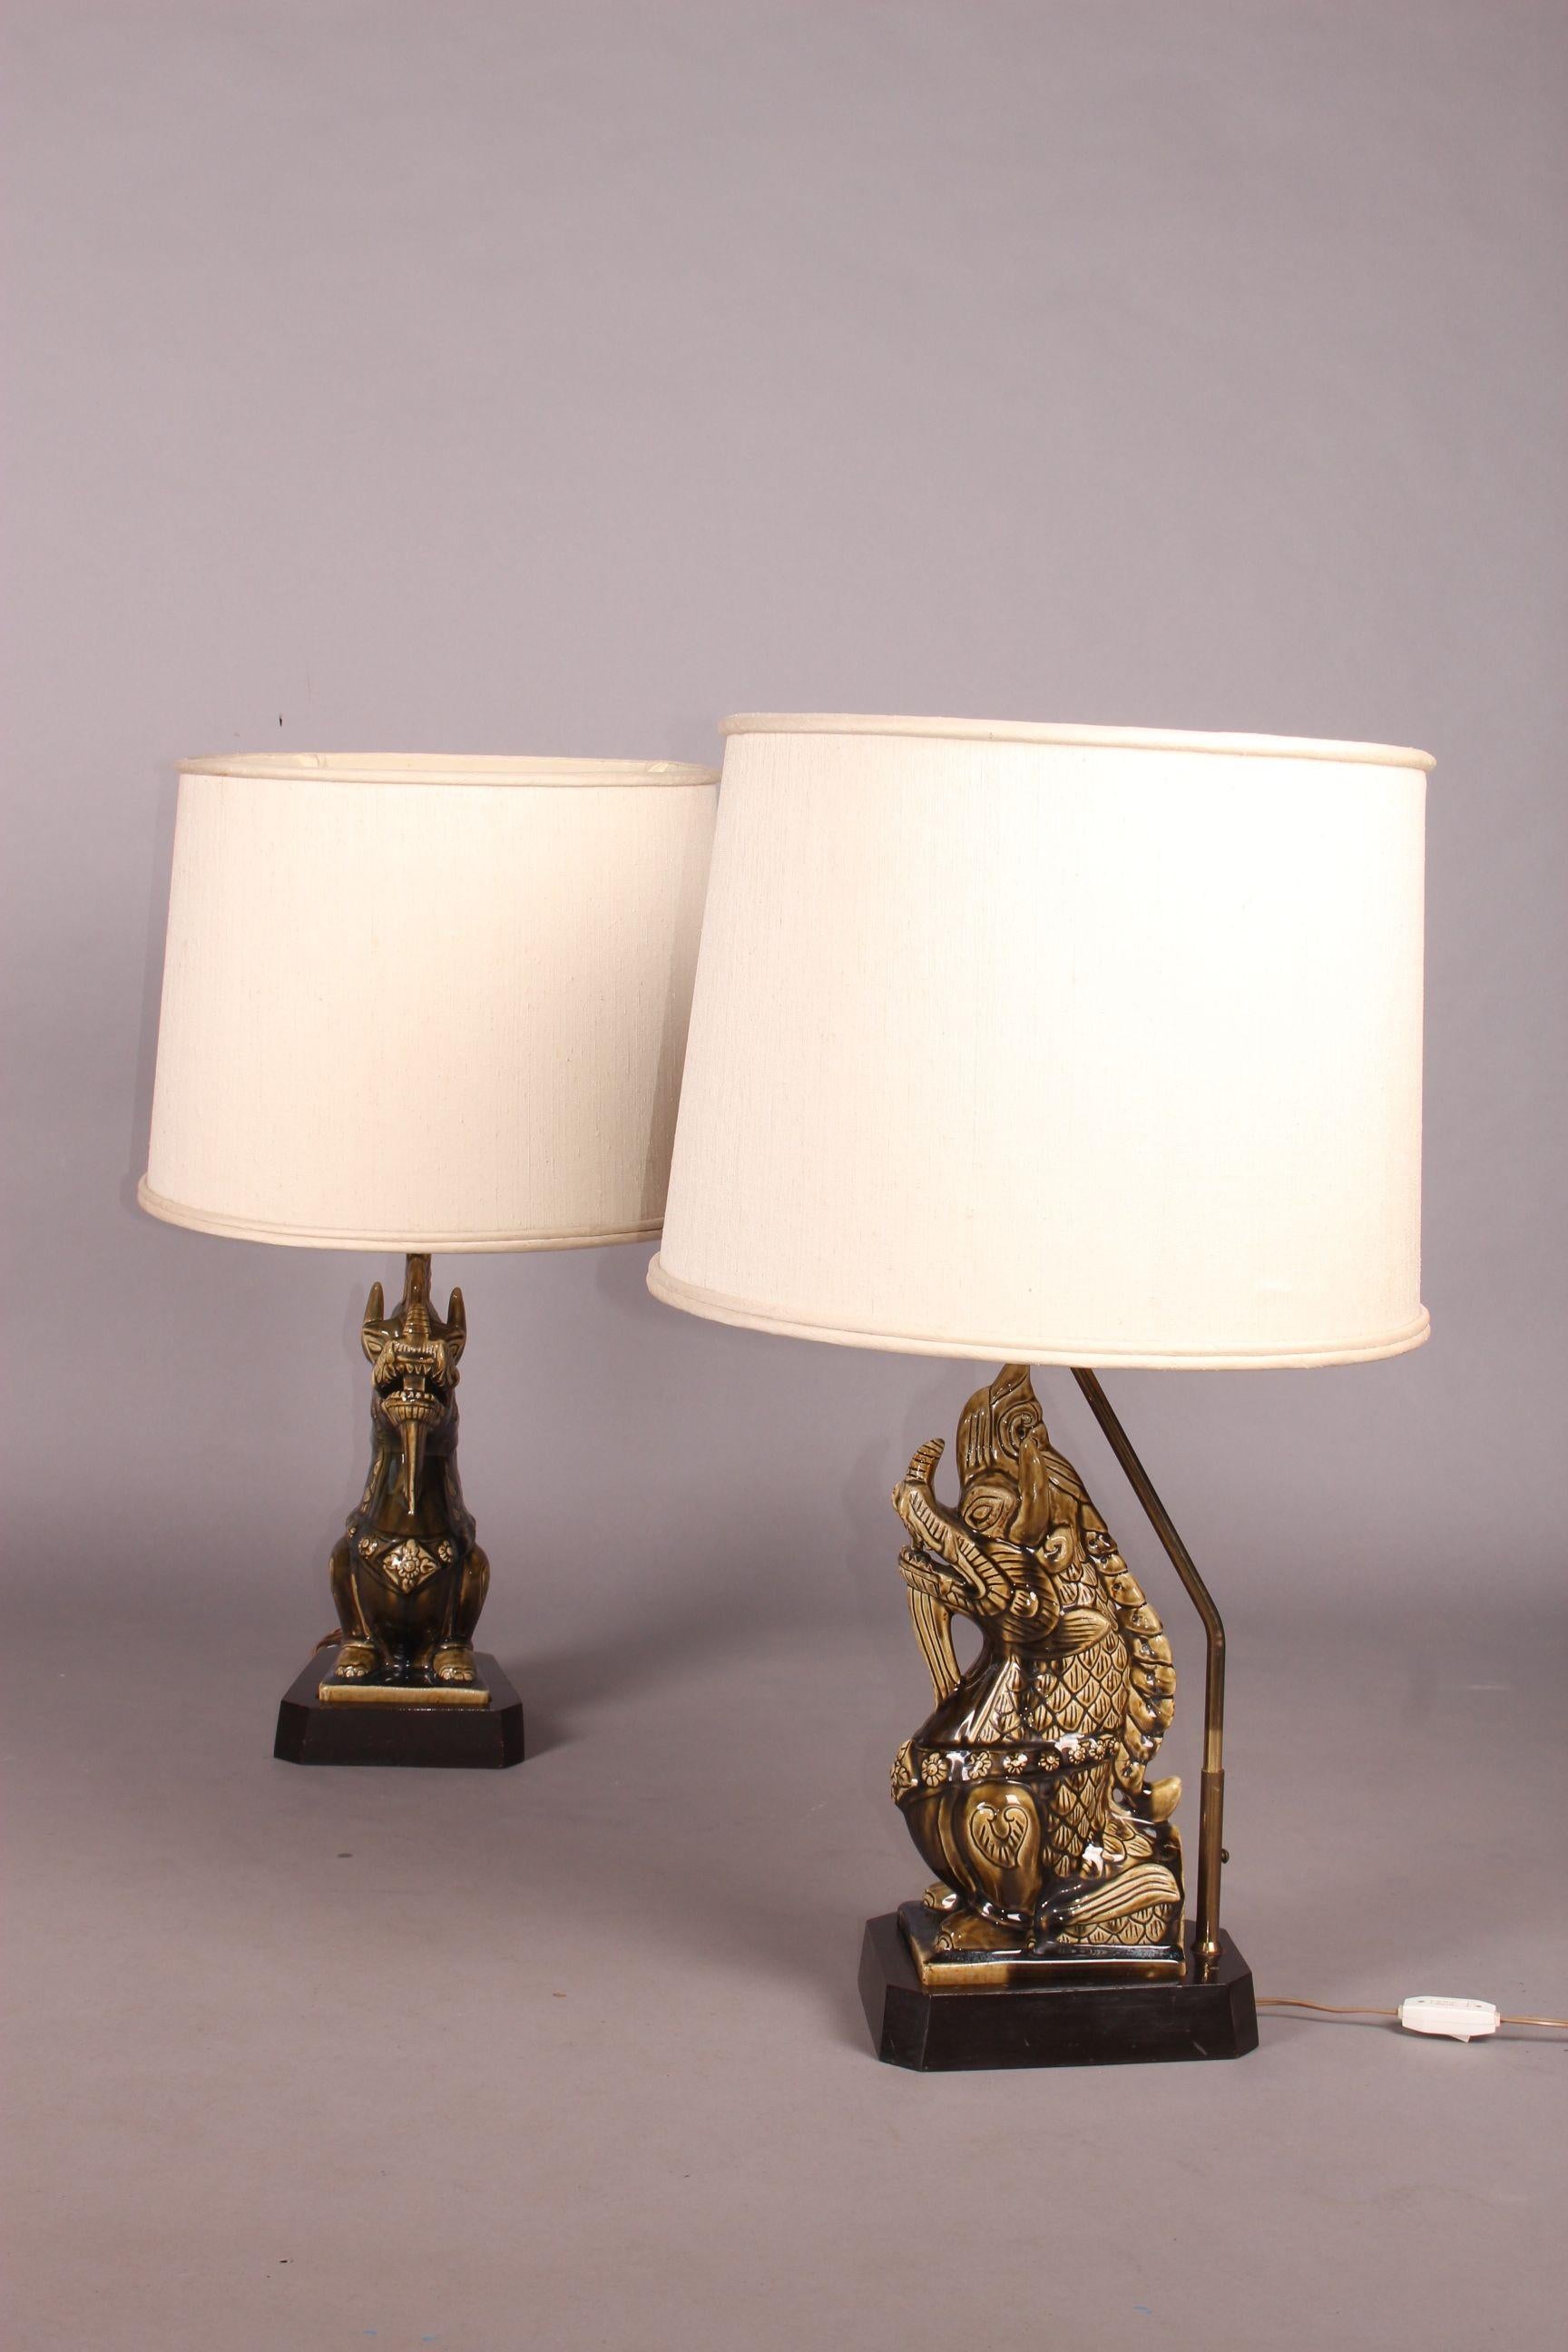 Ceramic pair of table lamp, one shade must be change.